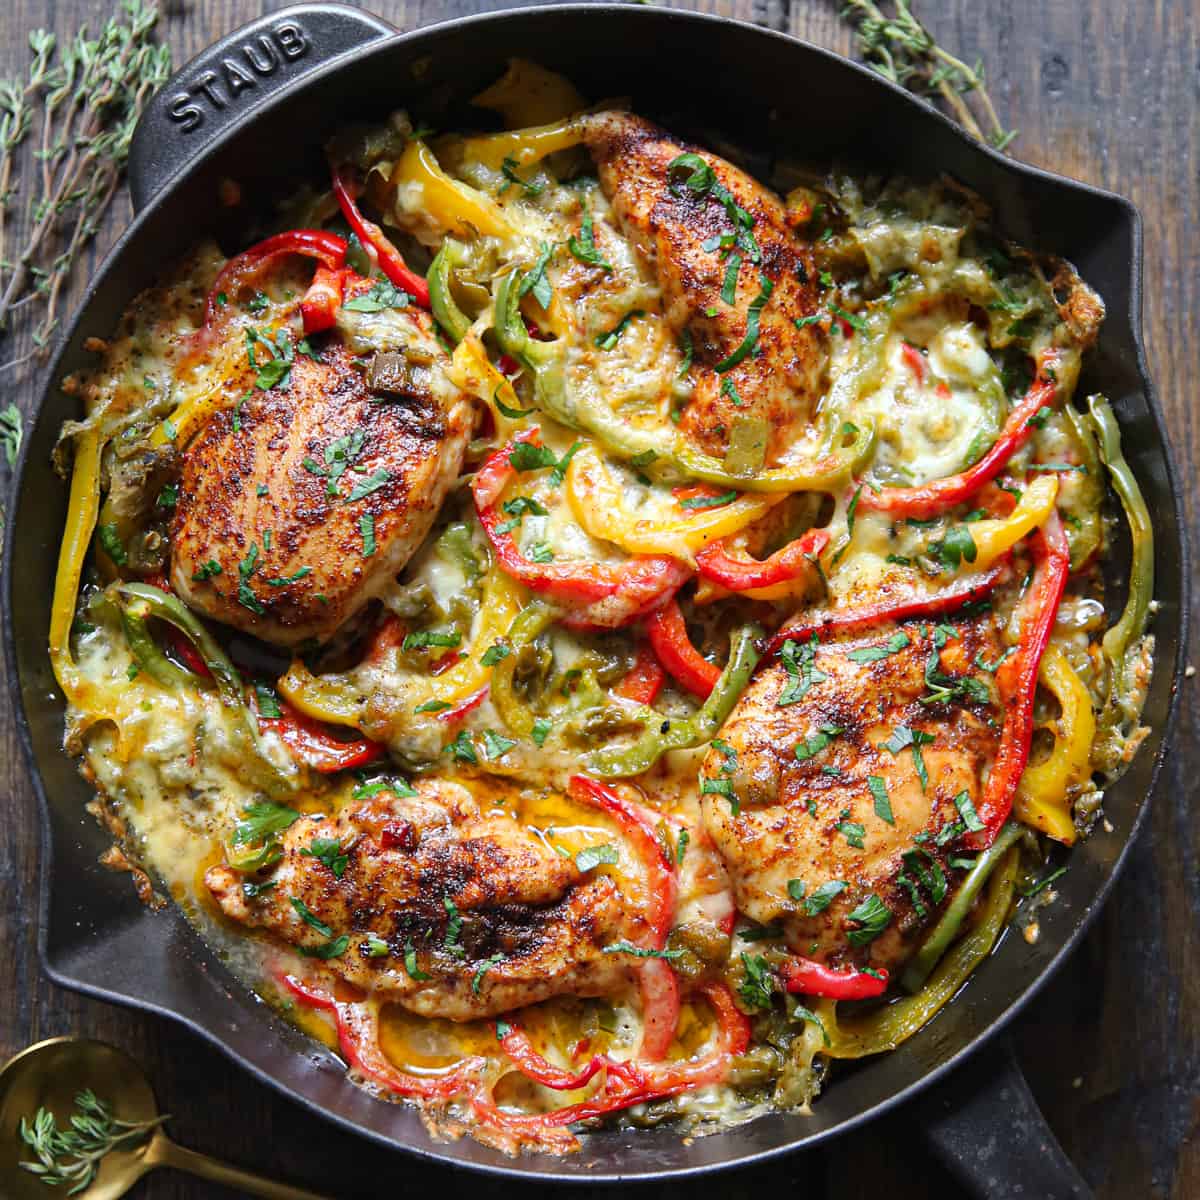 Fajita Chicken Bake with Bell Peppers in a cast iron skillet.